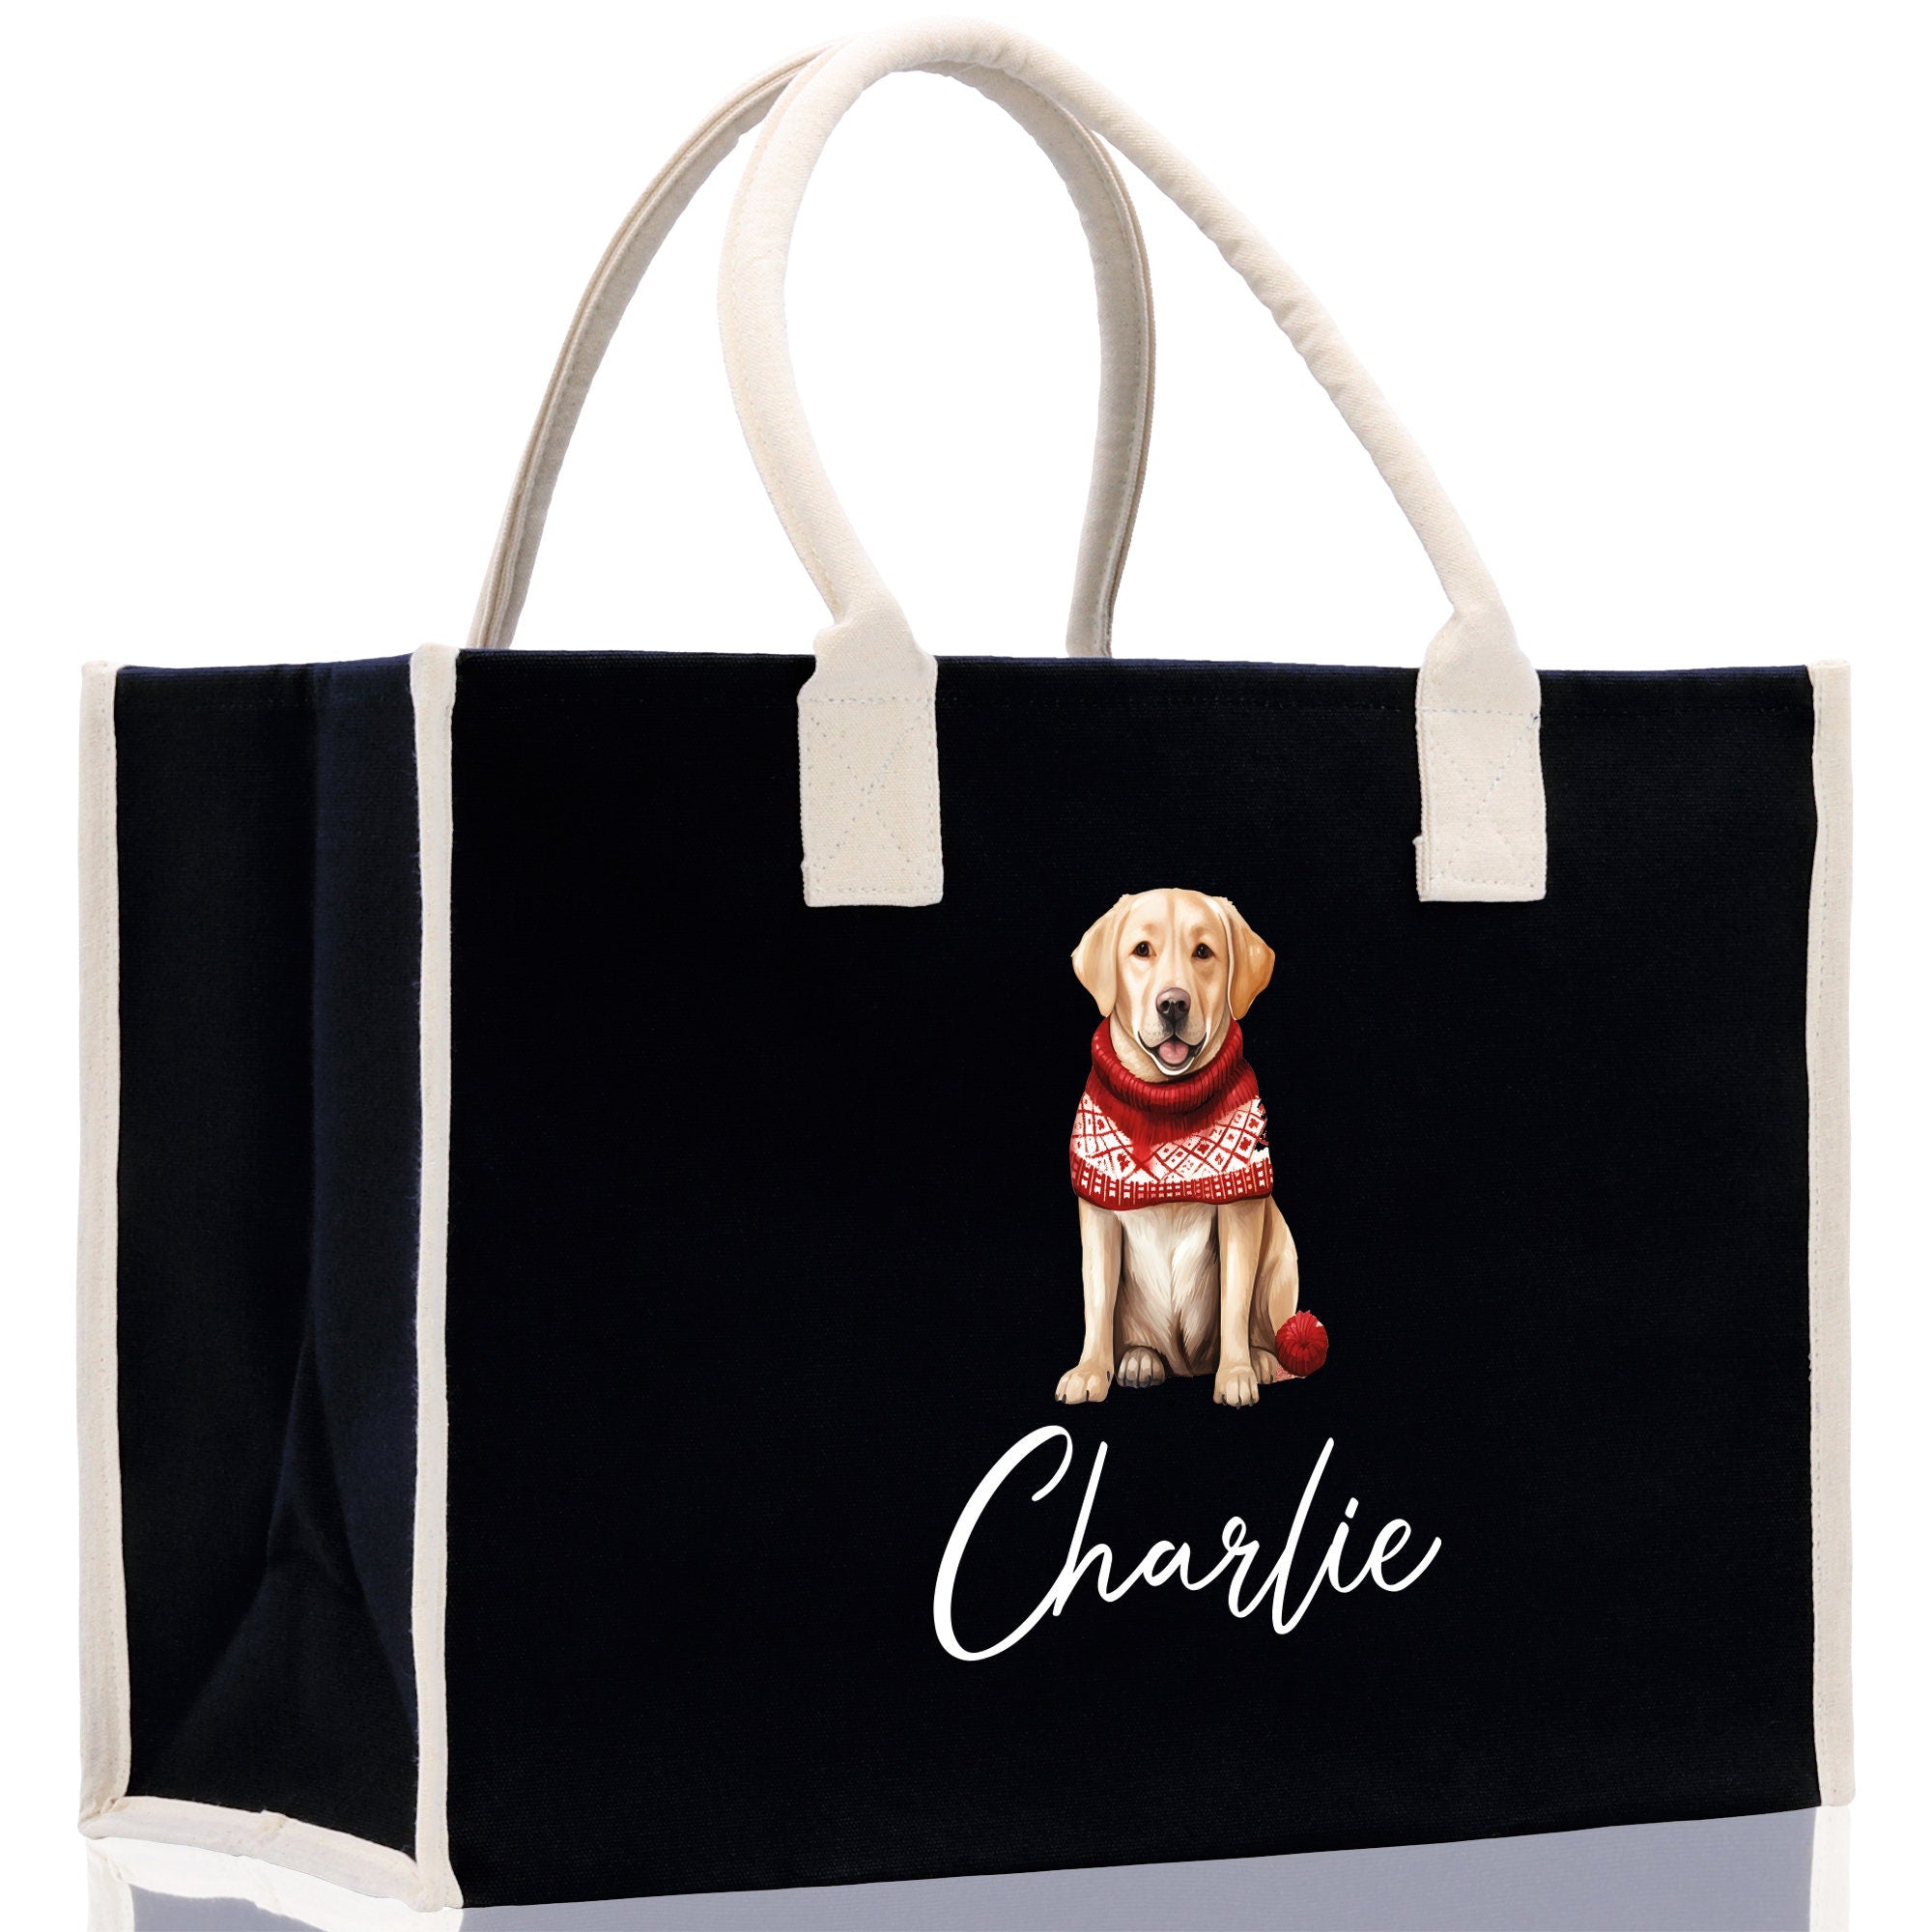 a black shopping bag with a picture of a dog on it